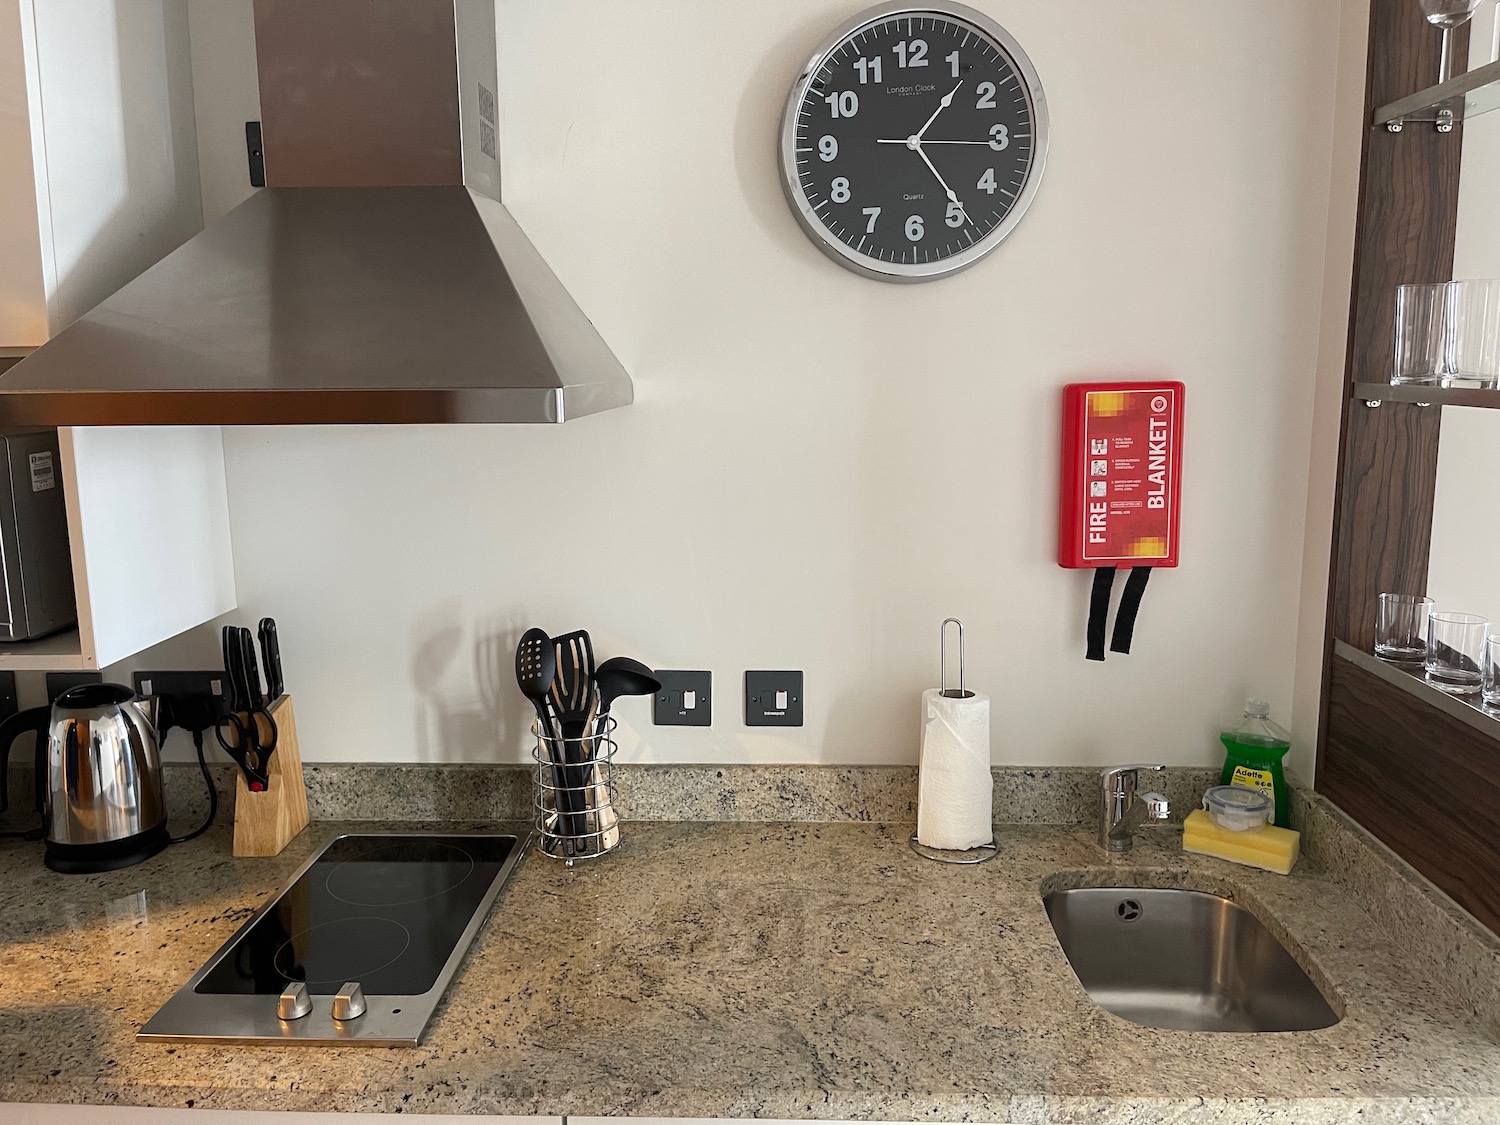 a kitchen counter with a clock on the wall